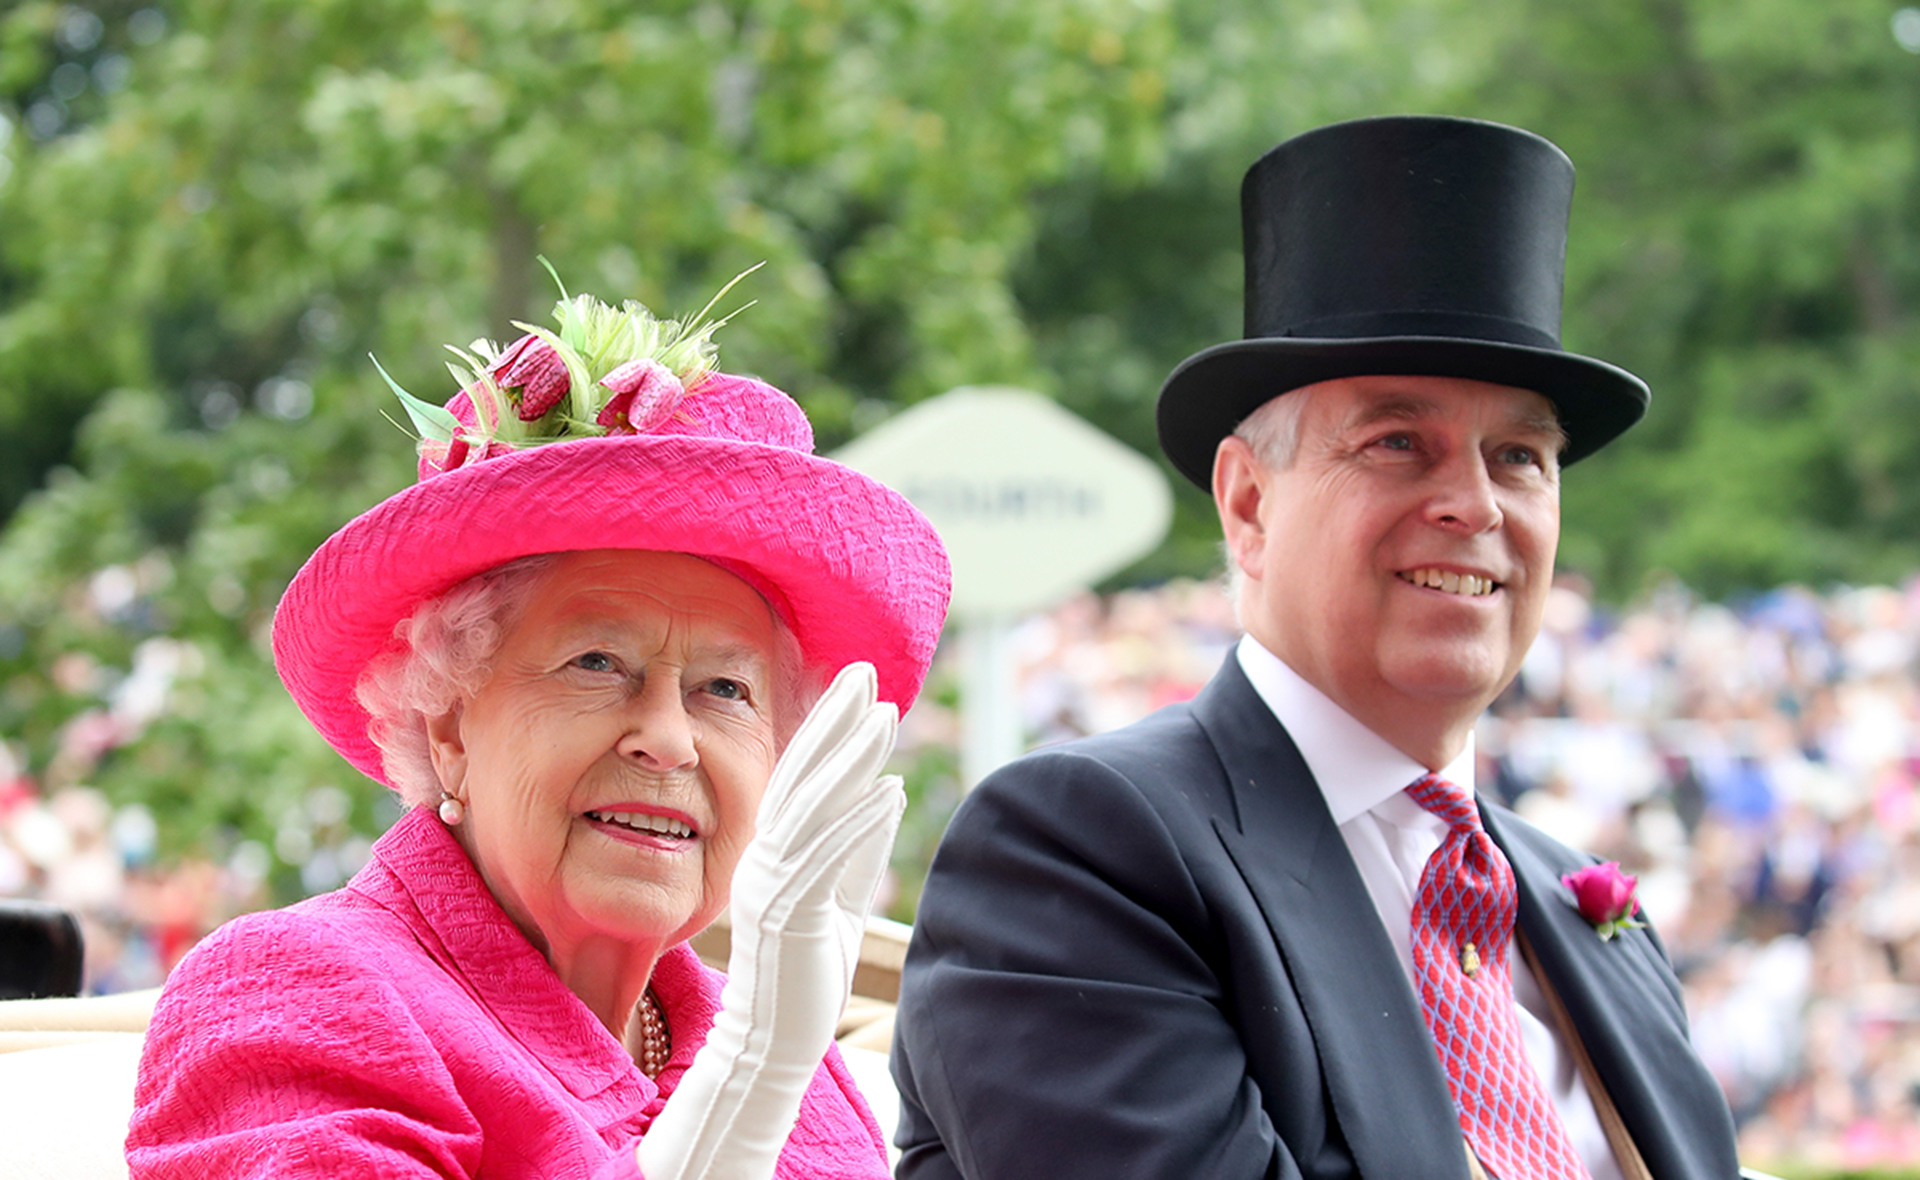 “I feel so bad for those dogs” Prince Andrew is set to take care of the late Queen’s corgis